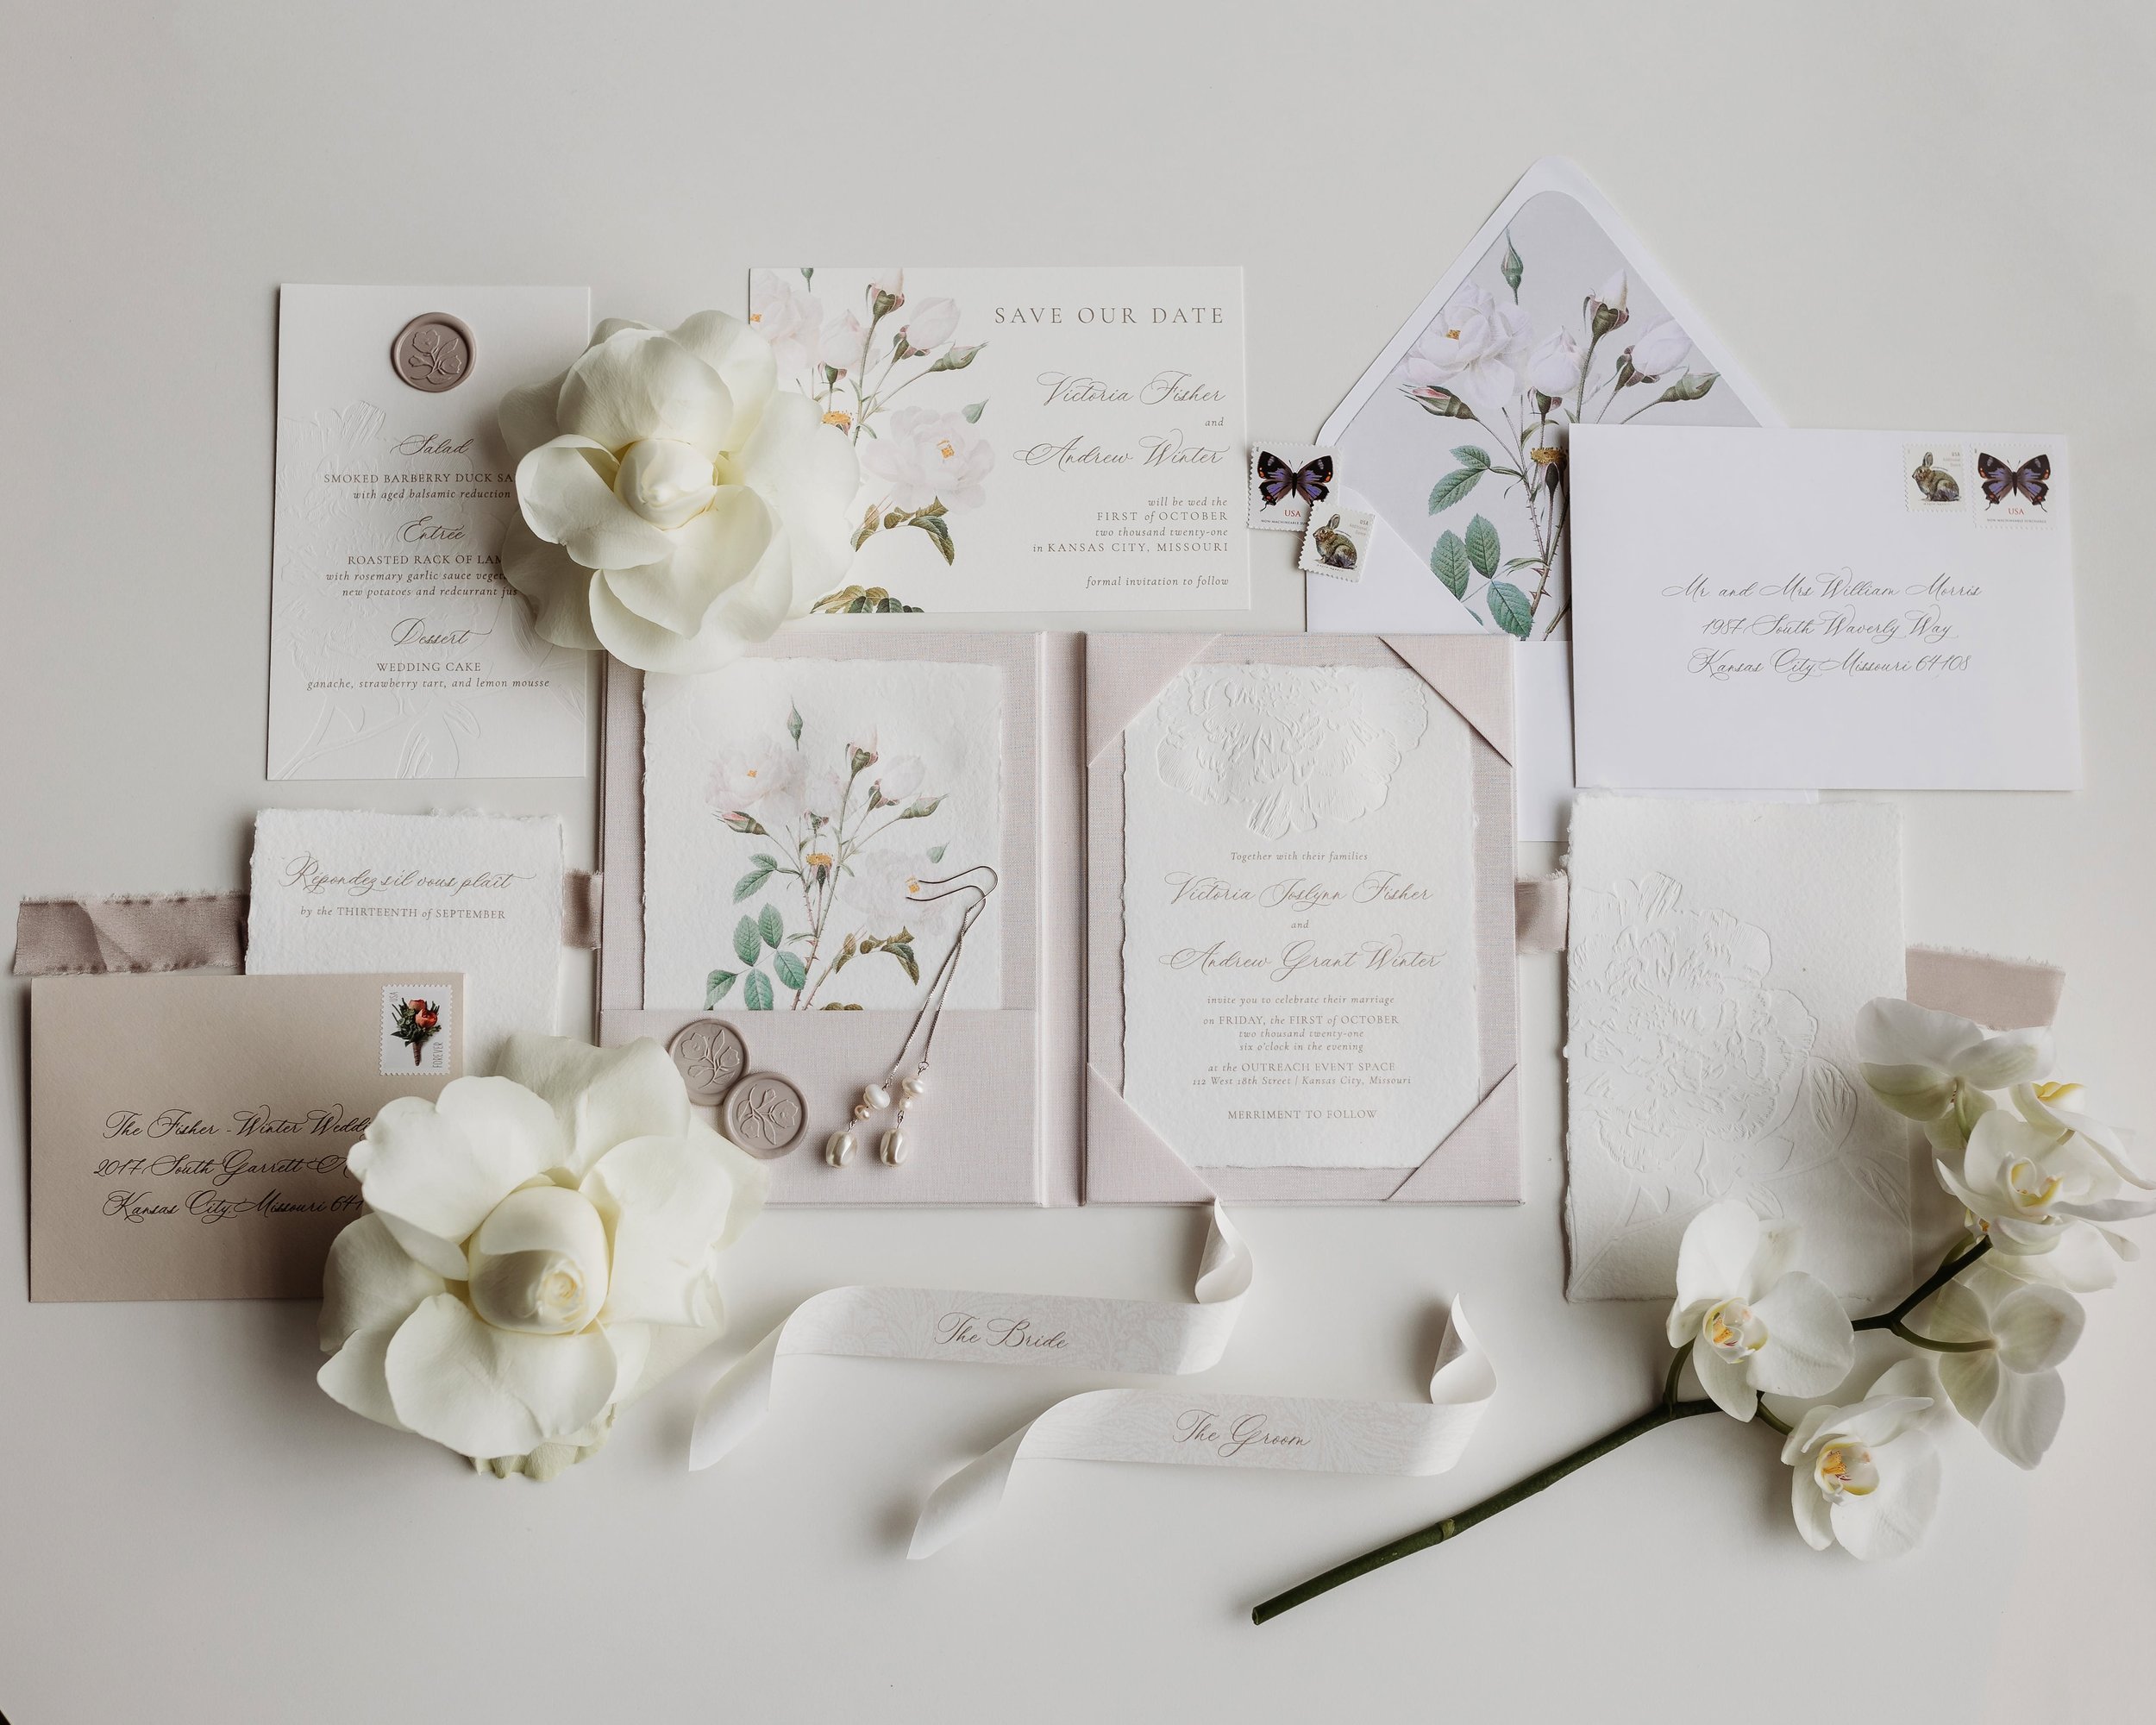 full elegant invitation suite for an Outreach Event Space wedding inspiration shoot